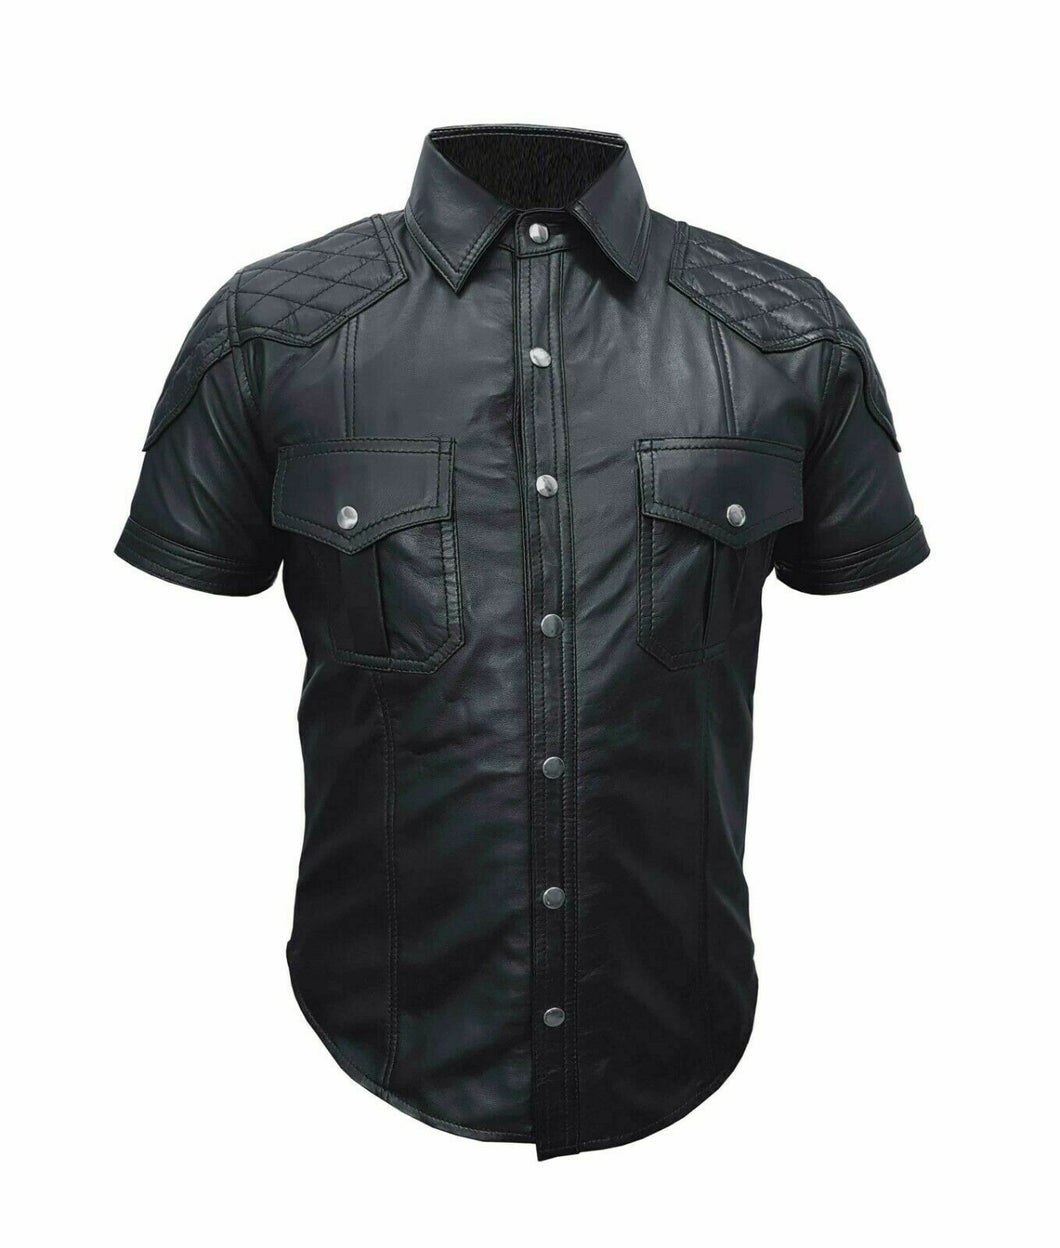 Men's Genuine Leather Quilted short sleeve shirt